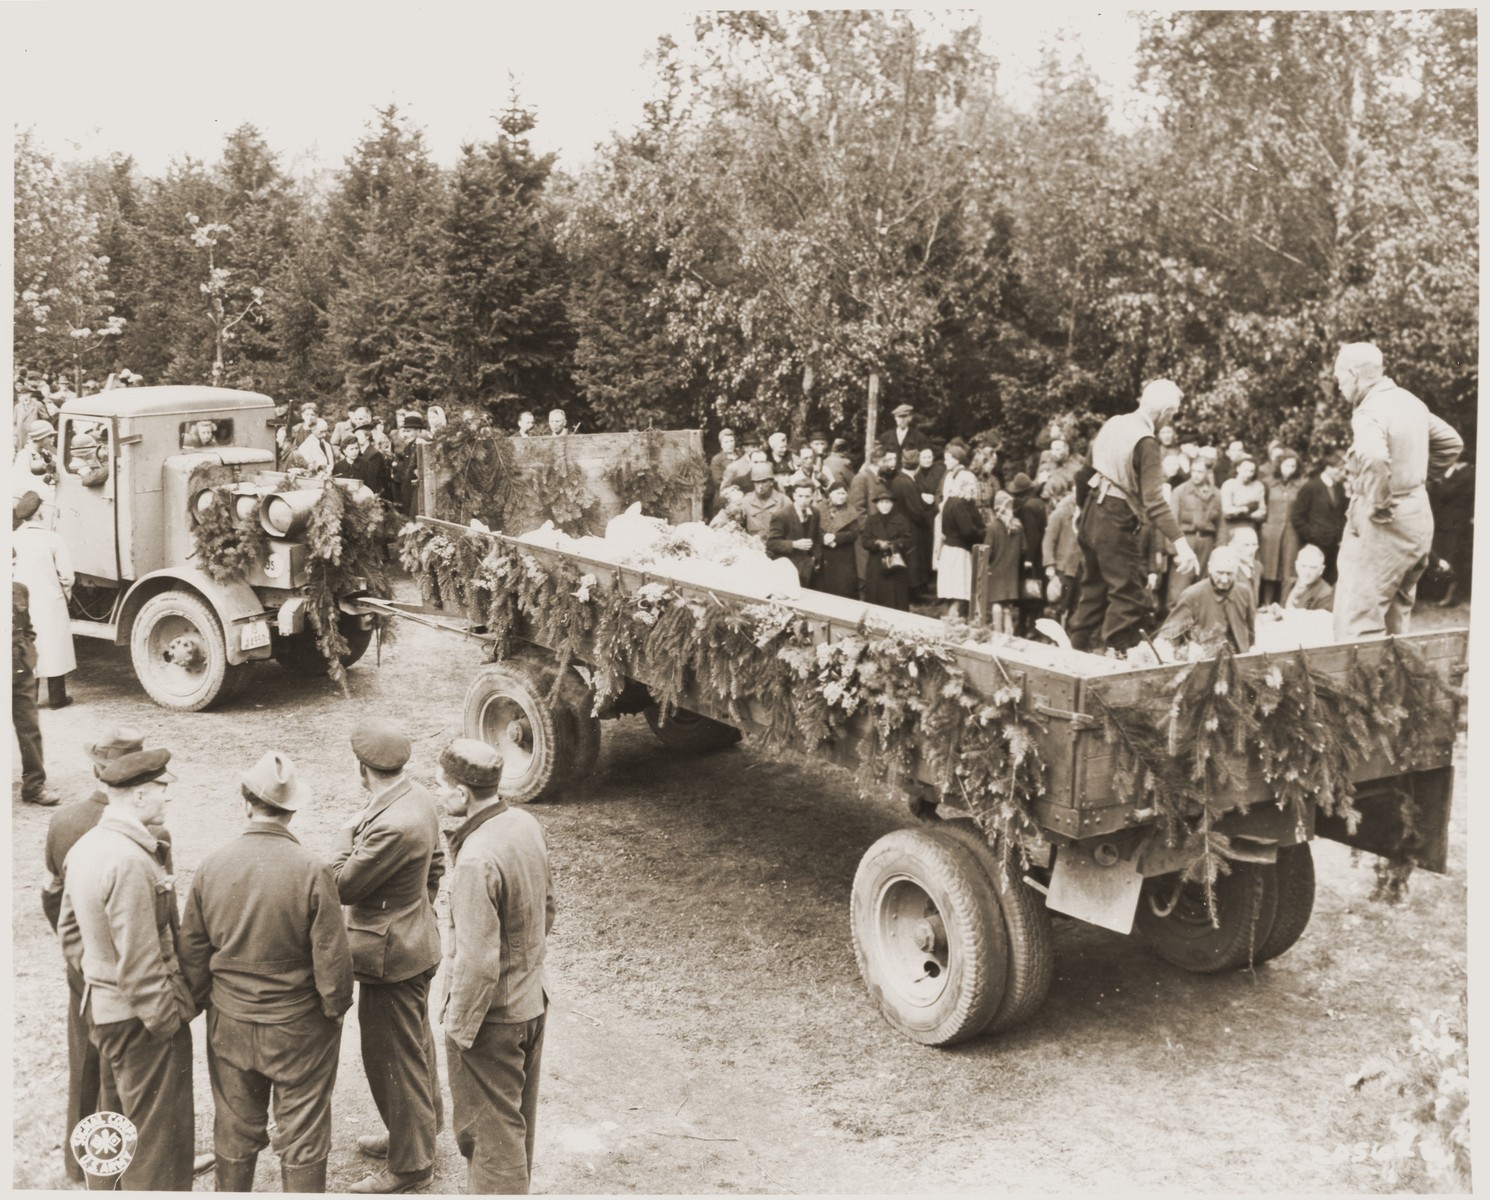 German civilians load the bodies of Soviet prisoners of war wrapped in sheets onto a semi-trailer.  

The prisoners were exhumed from a mass grave in Wuelfel and will be reburied near the Hanover City Hall.

On April 8, 1945, 200 Red Army officers and other prisoners of war were sent on a death march from the Liebenau labor camp, 50 kilometers NW of Hanover, where the prisoners worked in a munitions factory.  As they reached Wuelfel, a suburb of Hanover, the SS guards ordered 25 prisoners, including one woman, to dig a large grave.  While this was being done, a prisoner killed a guard with a shovel and was able to escape to the woods nearby.  From there he heard the shots as the remaining prisoners were killed and buried in the grave.  Several weeks later, as American troops swept through the area, the mass grave was discovered.  On May 2, the 35th Division of the U.S. Ninth Army gathered townspeople from Wuelfel and forced them to exhume the grave, wrap the bodies in sheets, and rebury them near the Hanover City Hall.  Before reburial, many of the victims were identified by friends and relatives remaining in the area.